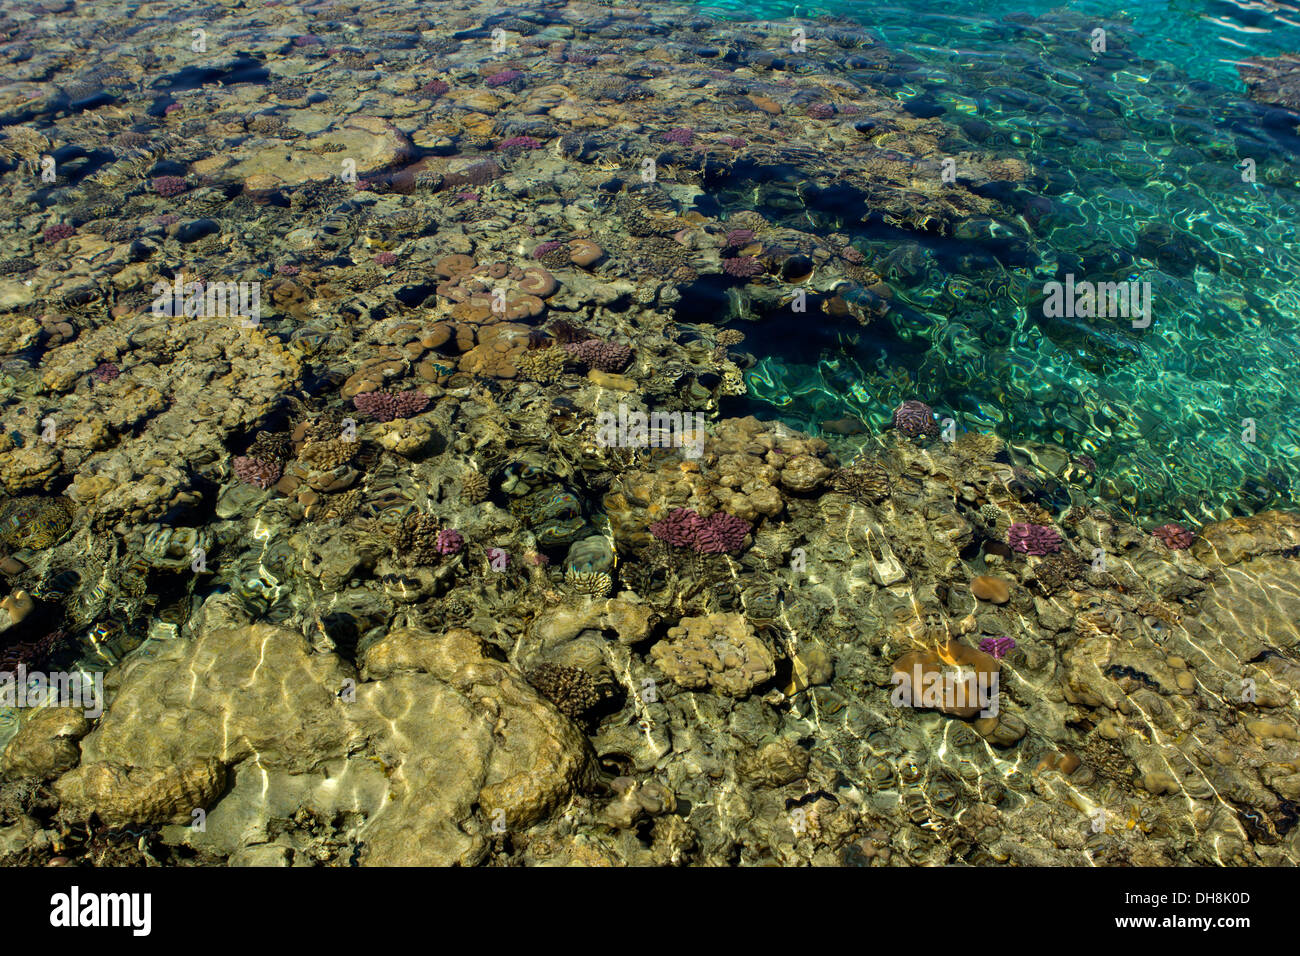 egypt coral reef in the sea with a great blaze of color Stock Photo